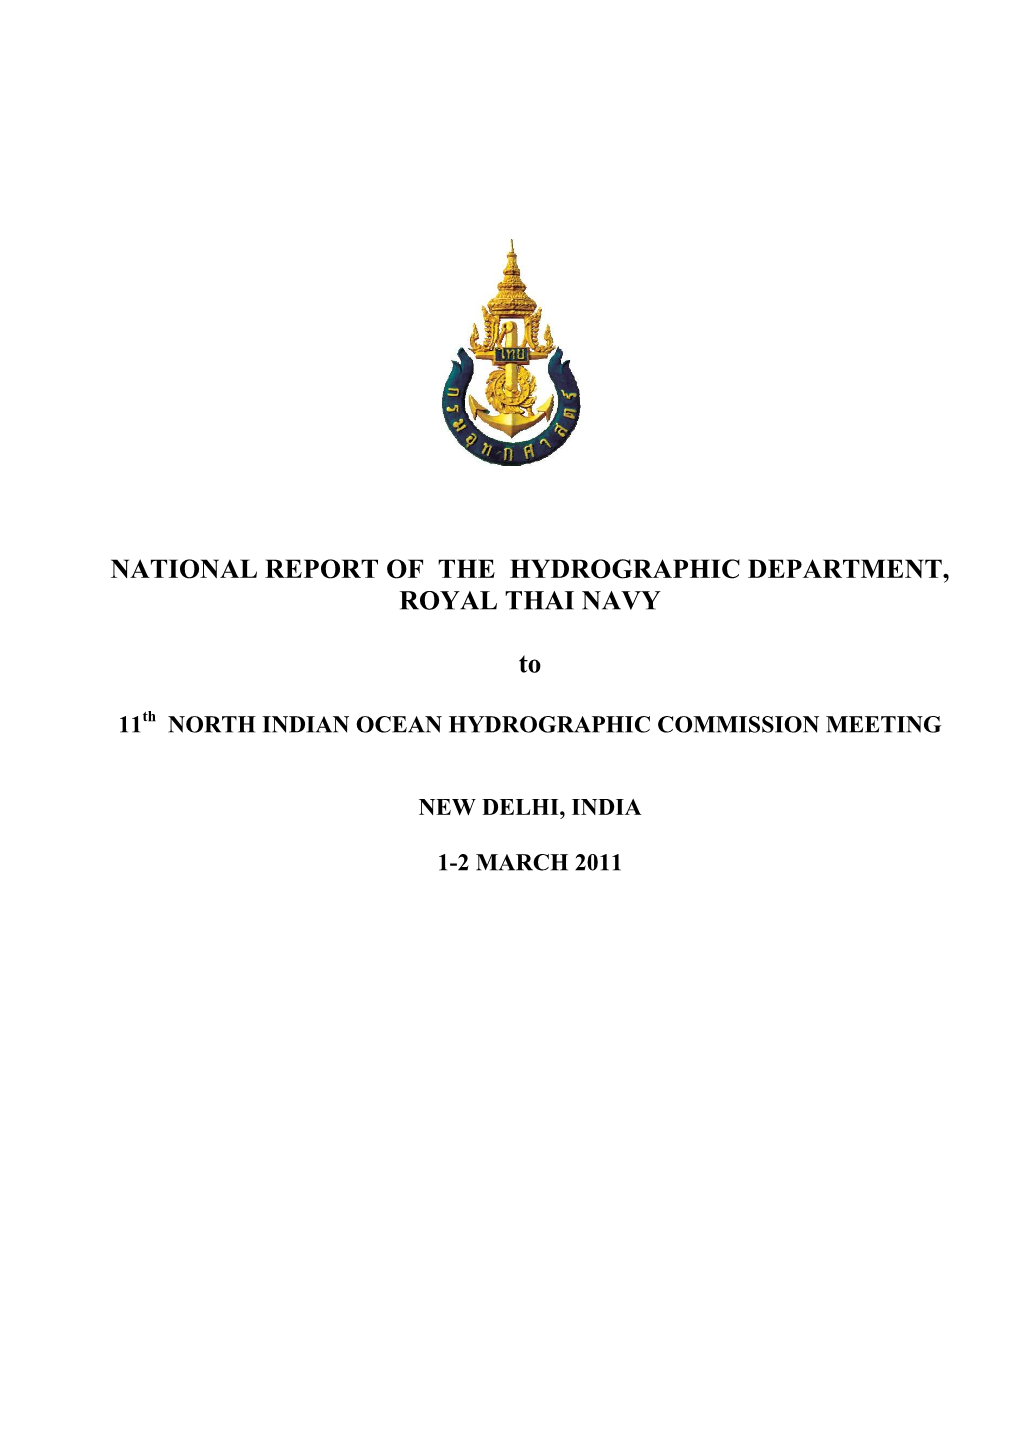 National Report of the Hydrographic Department, Royal Thai Navy